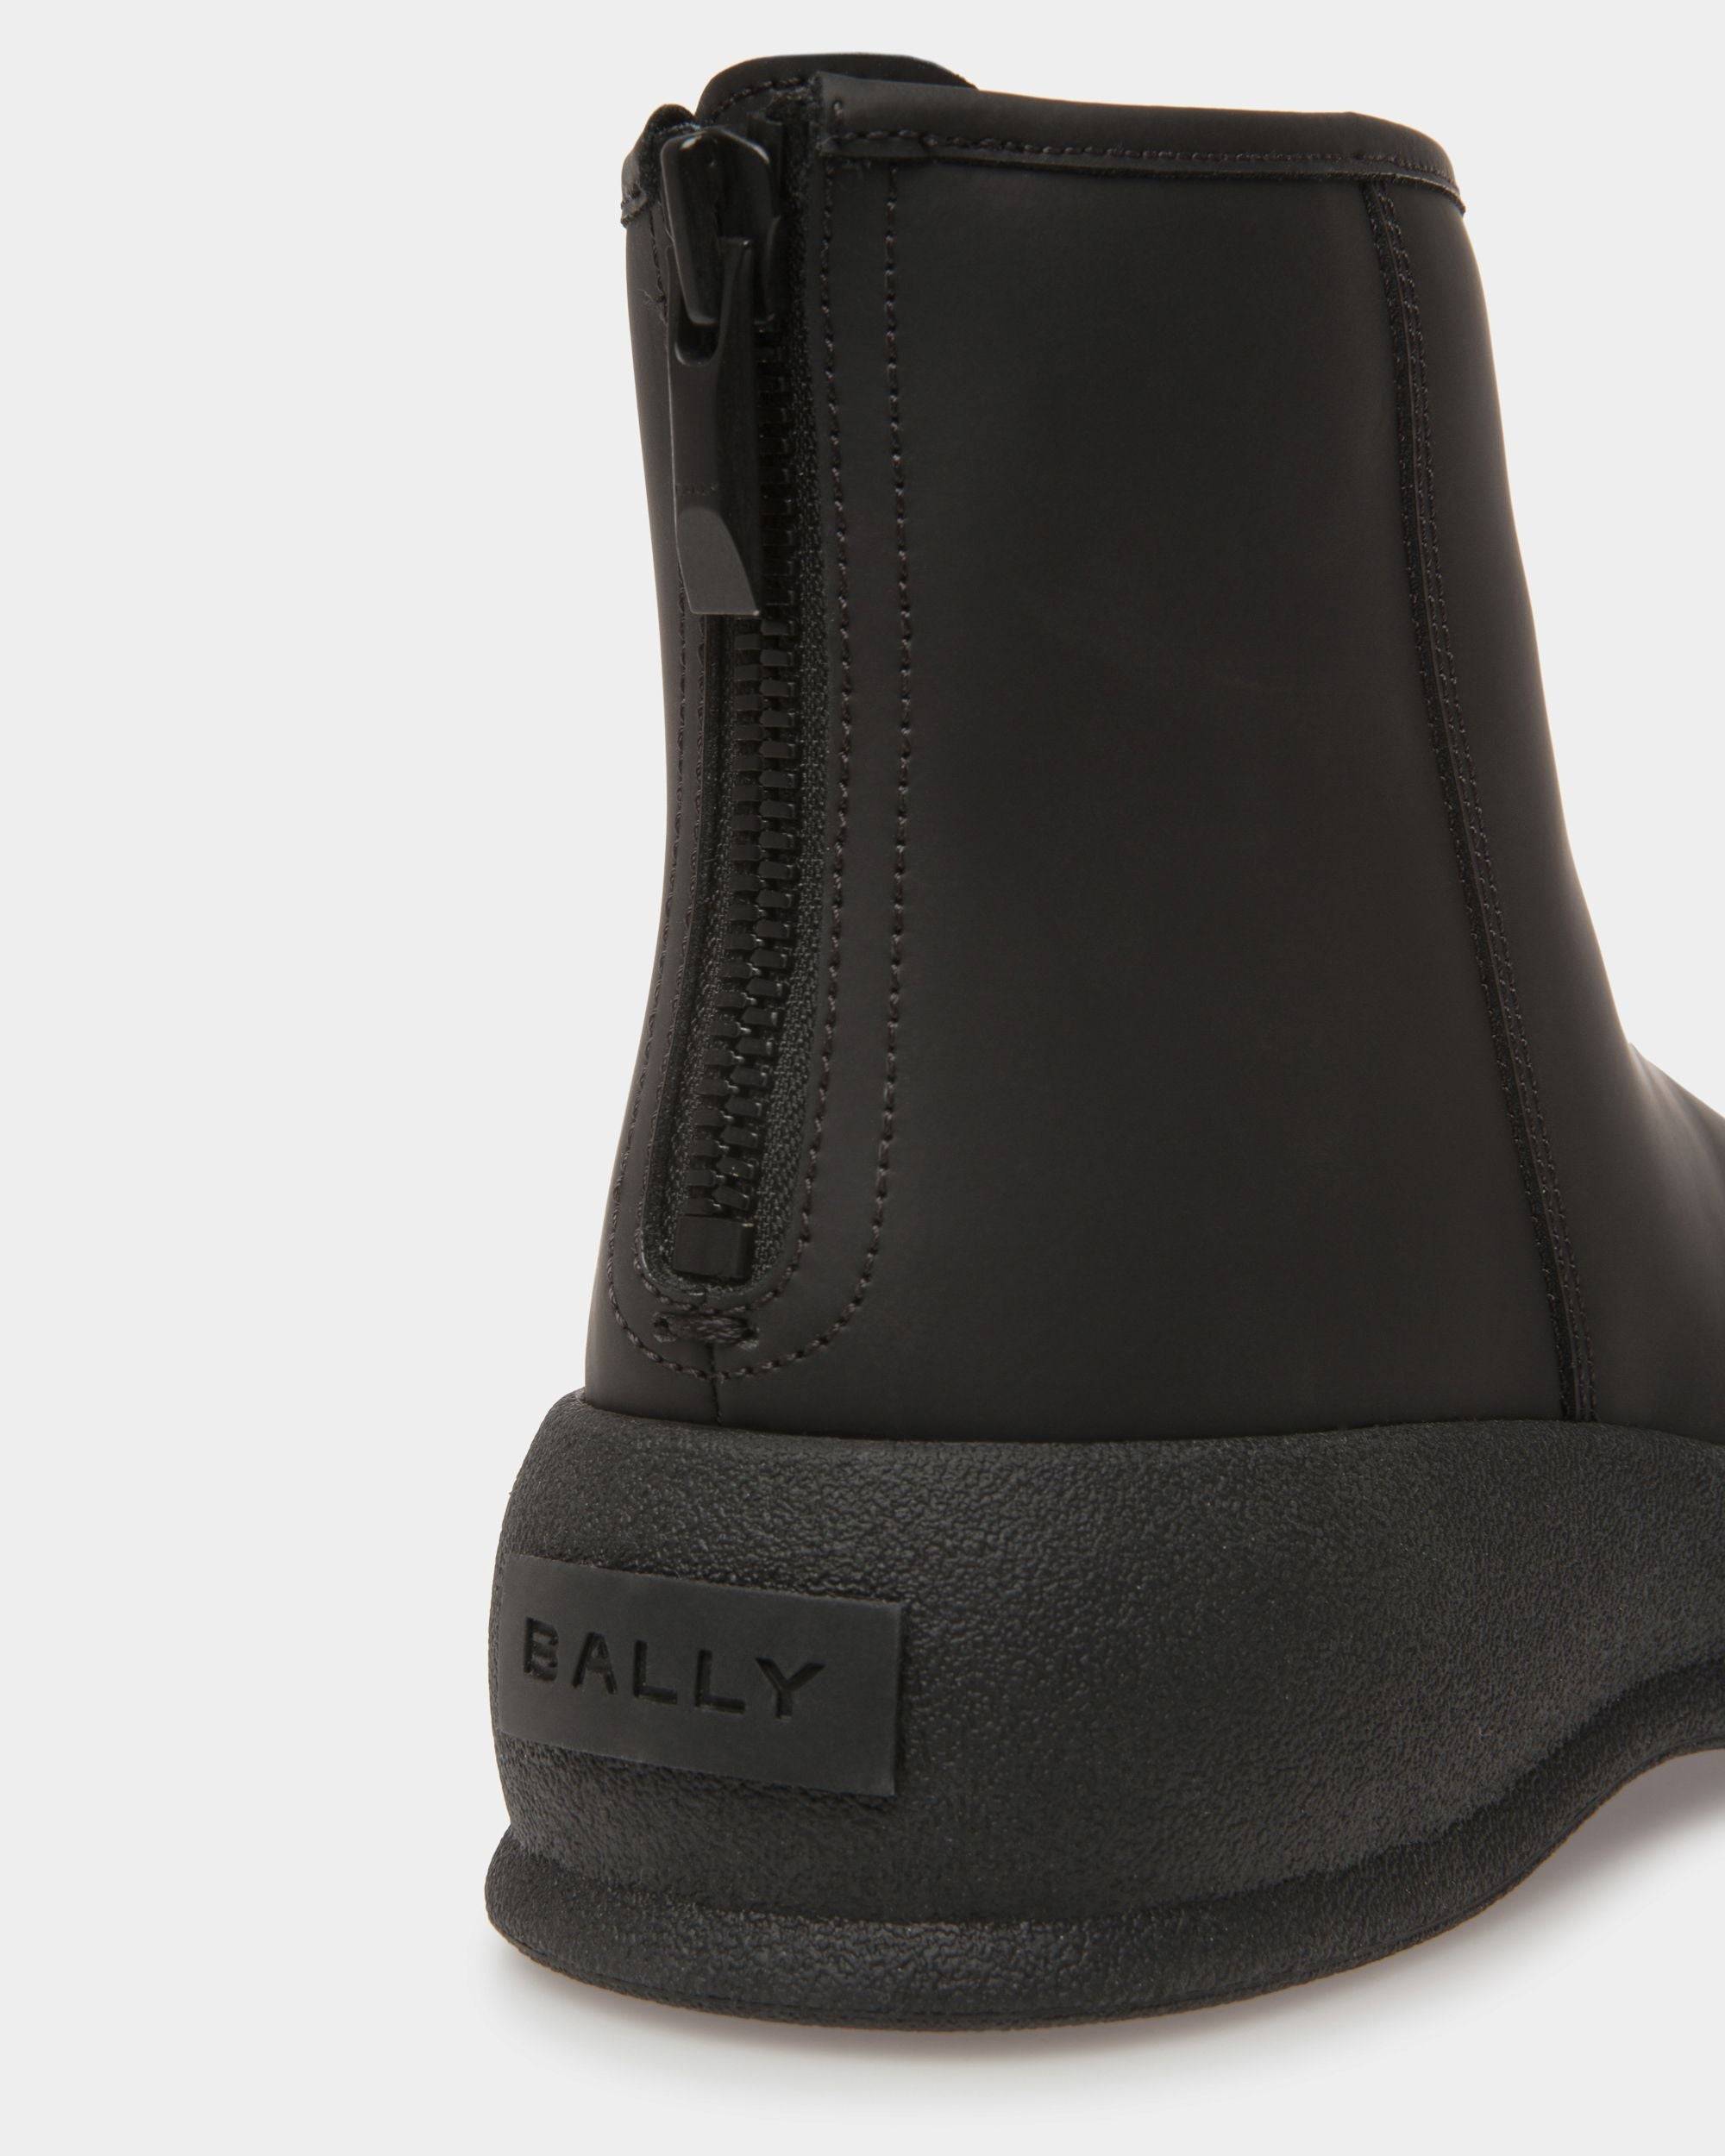 Carsey | Women's Boots | Black Leather | Bally | Still Life Detail